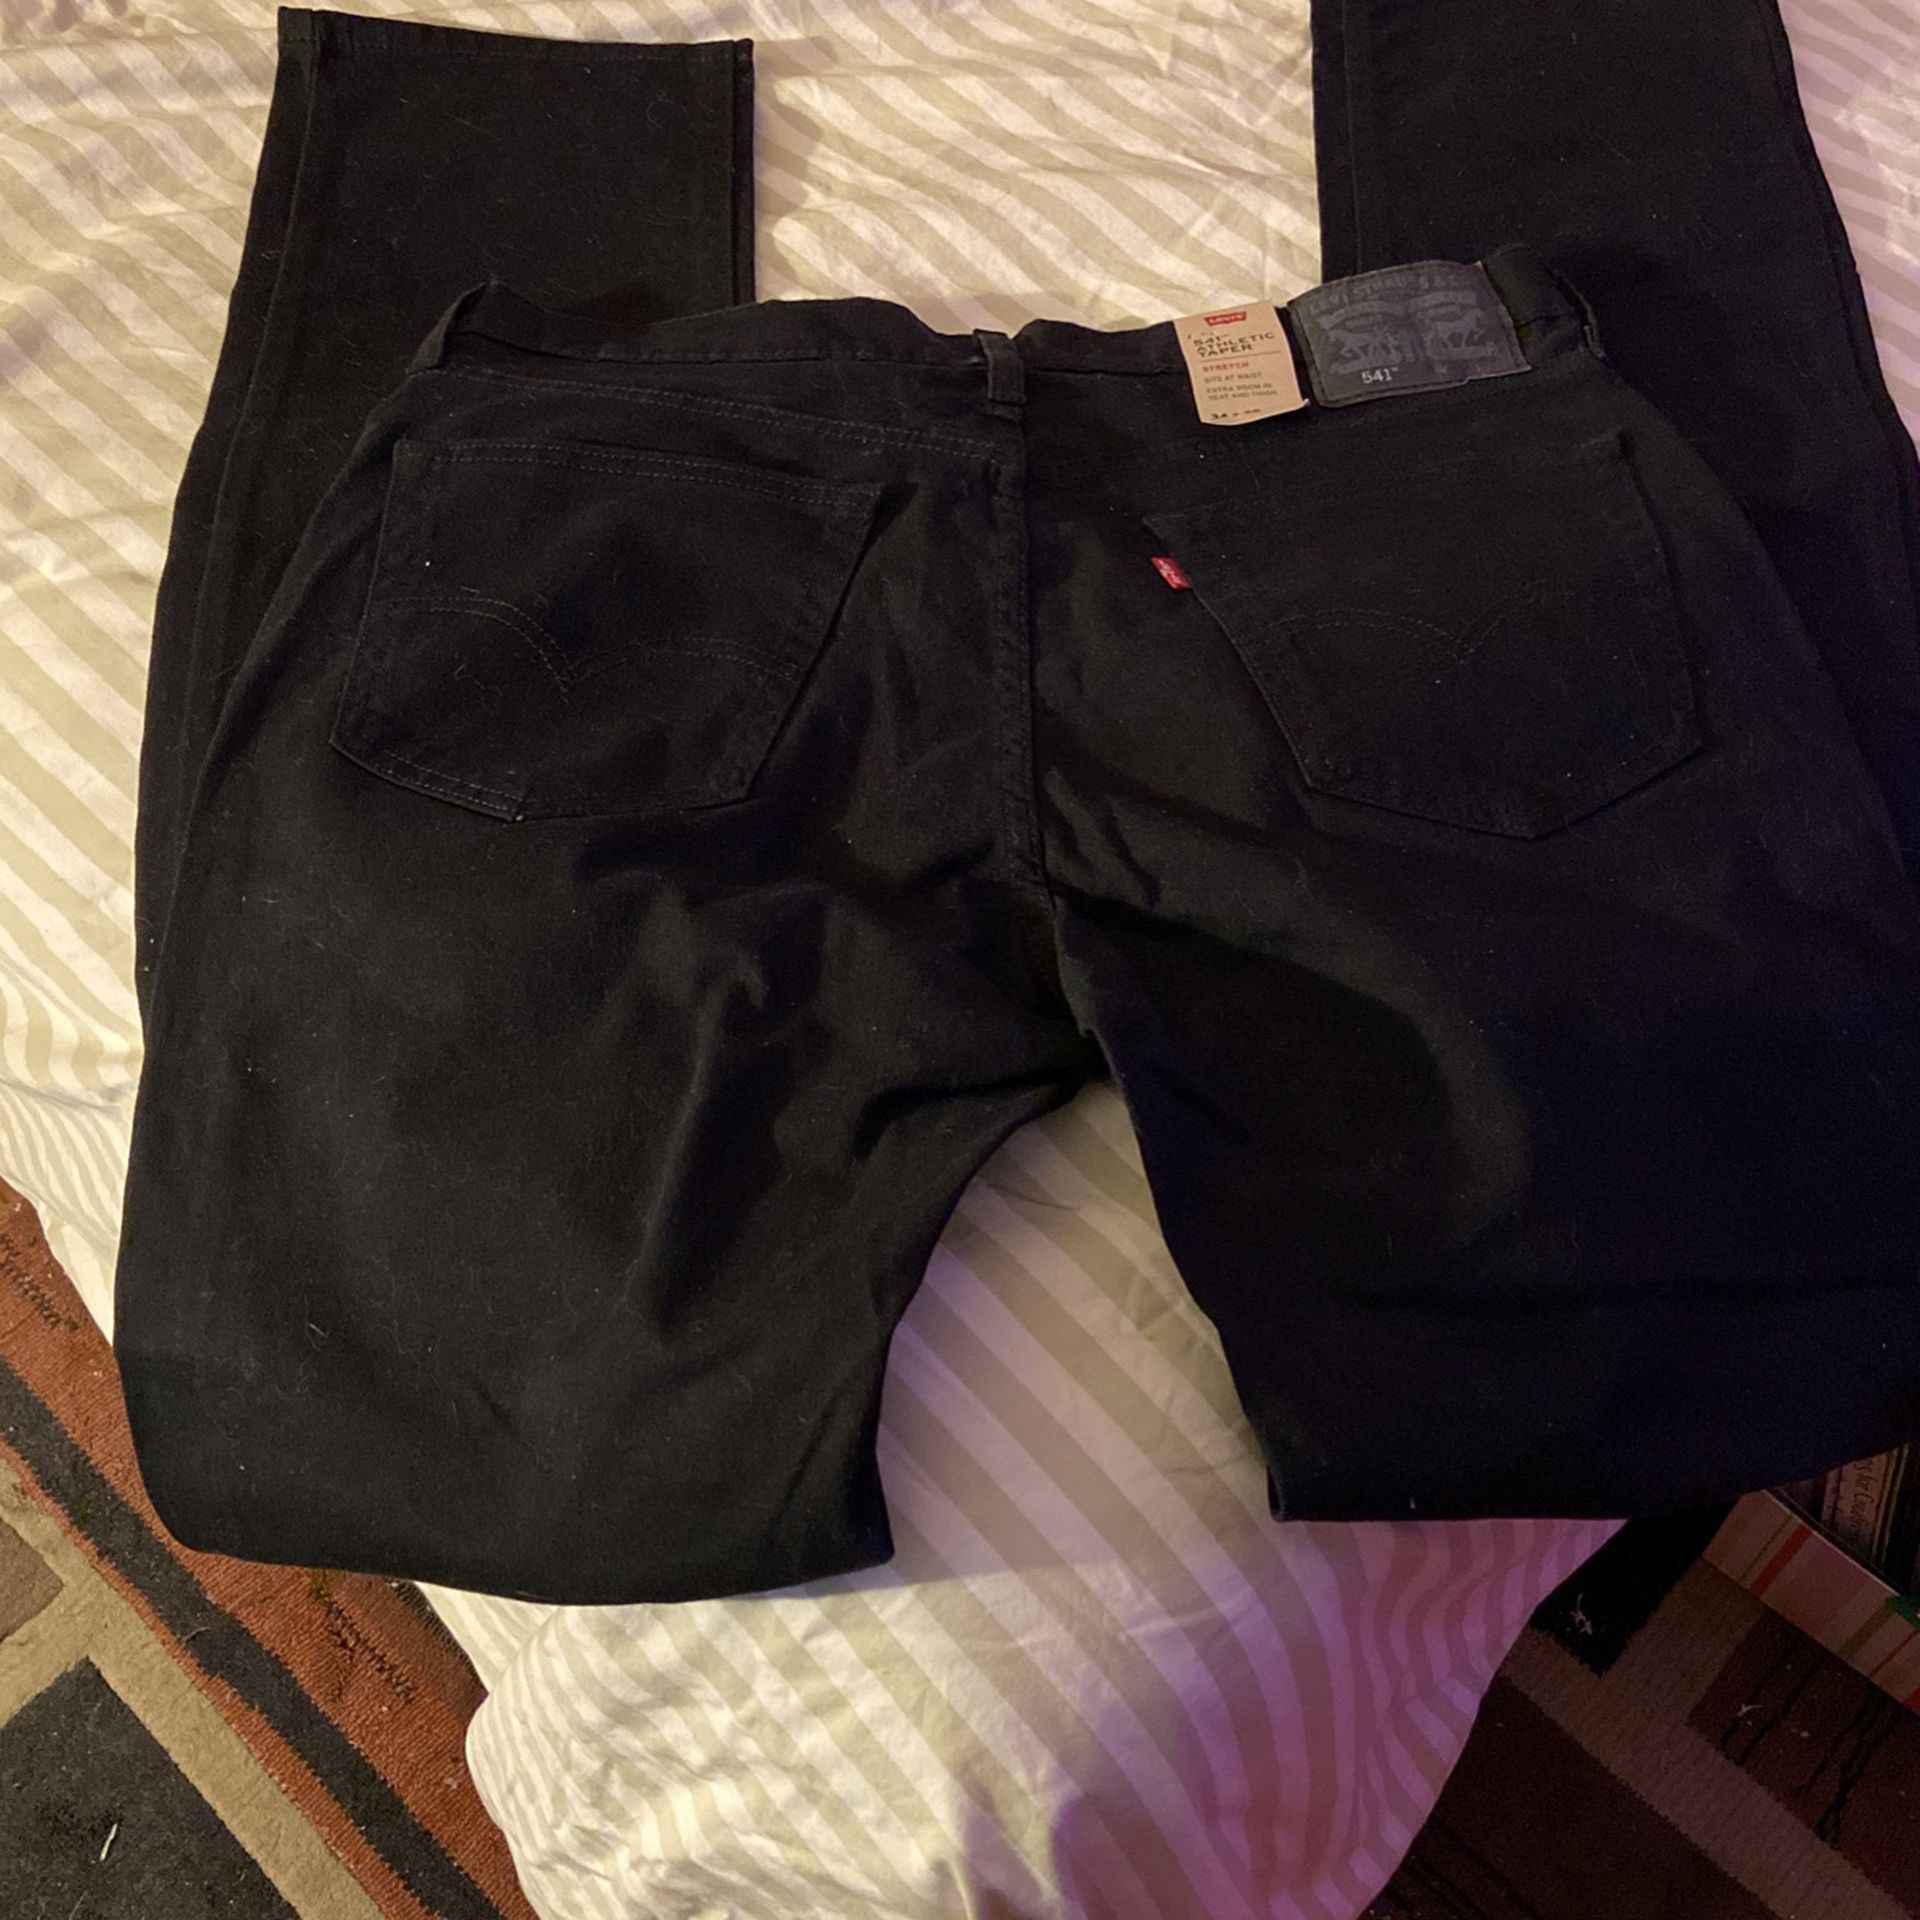 New Levi's 541 Black Jeans!! for Sale in Lake Elsinore, CA - OfferUp